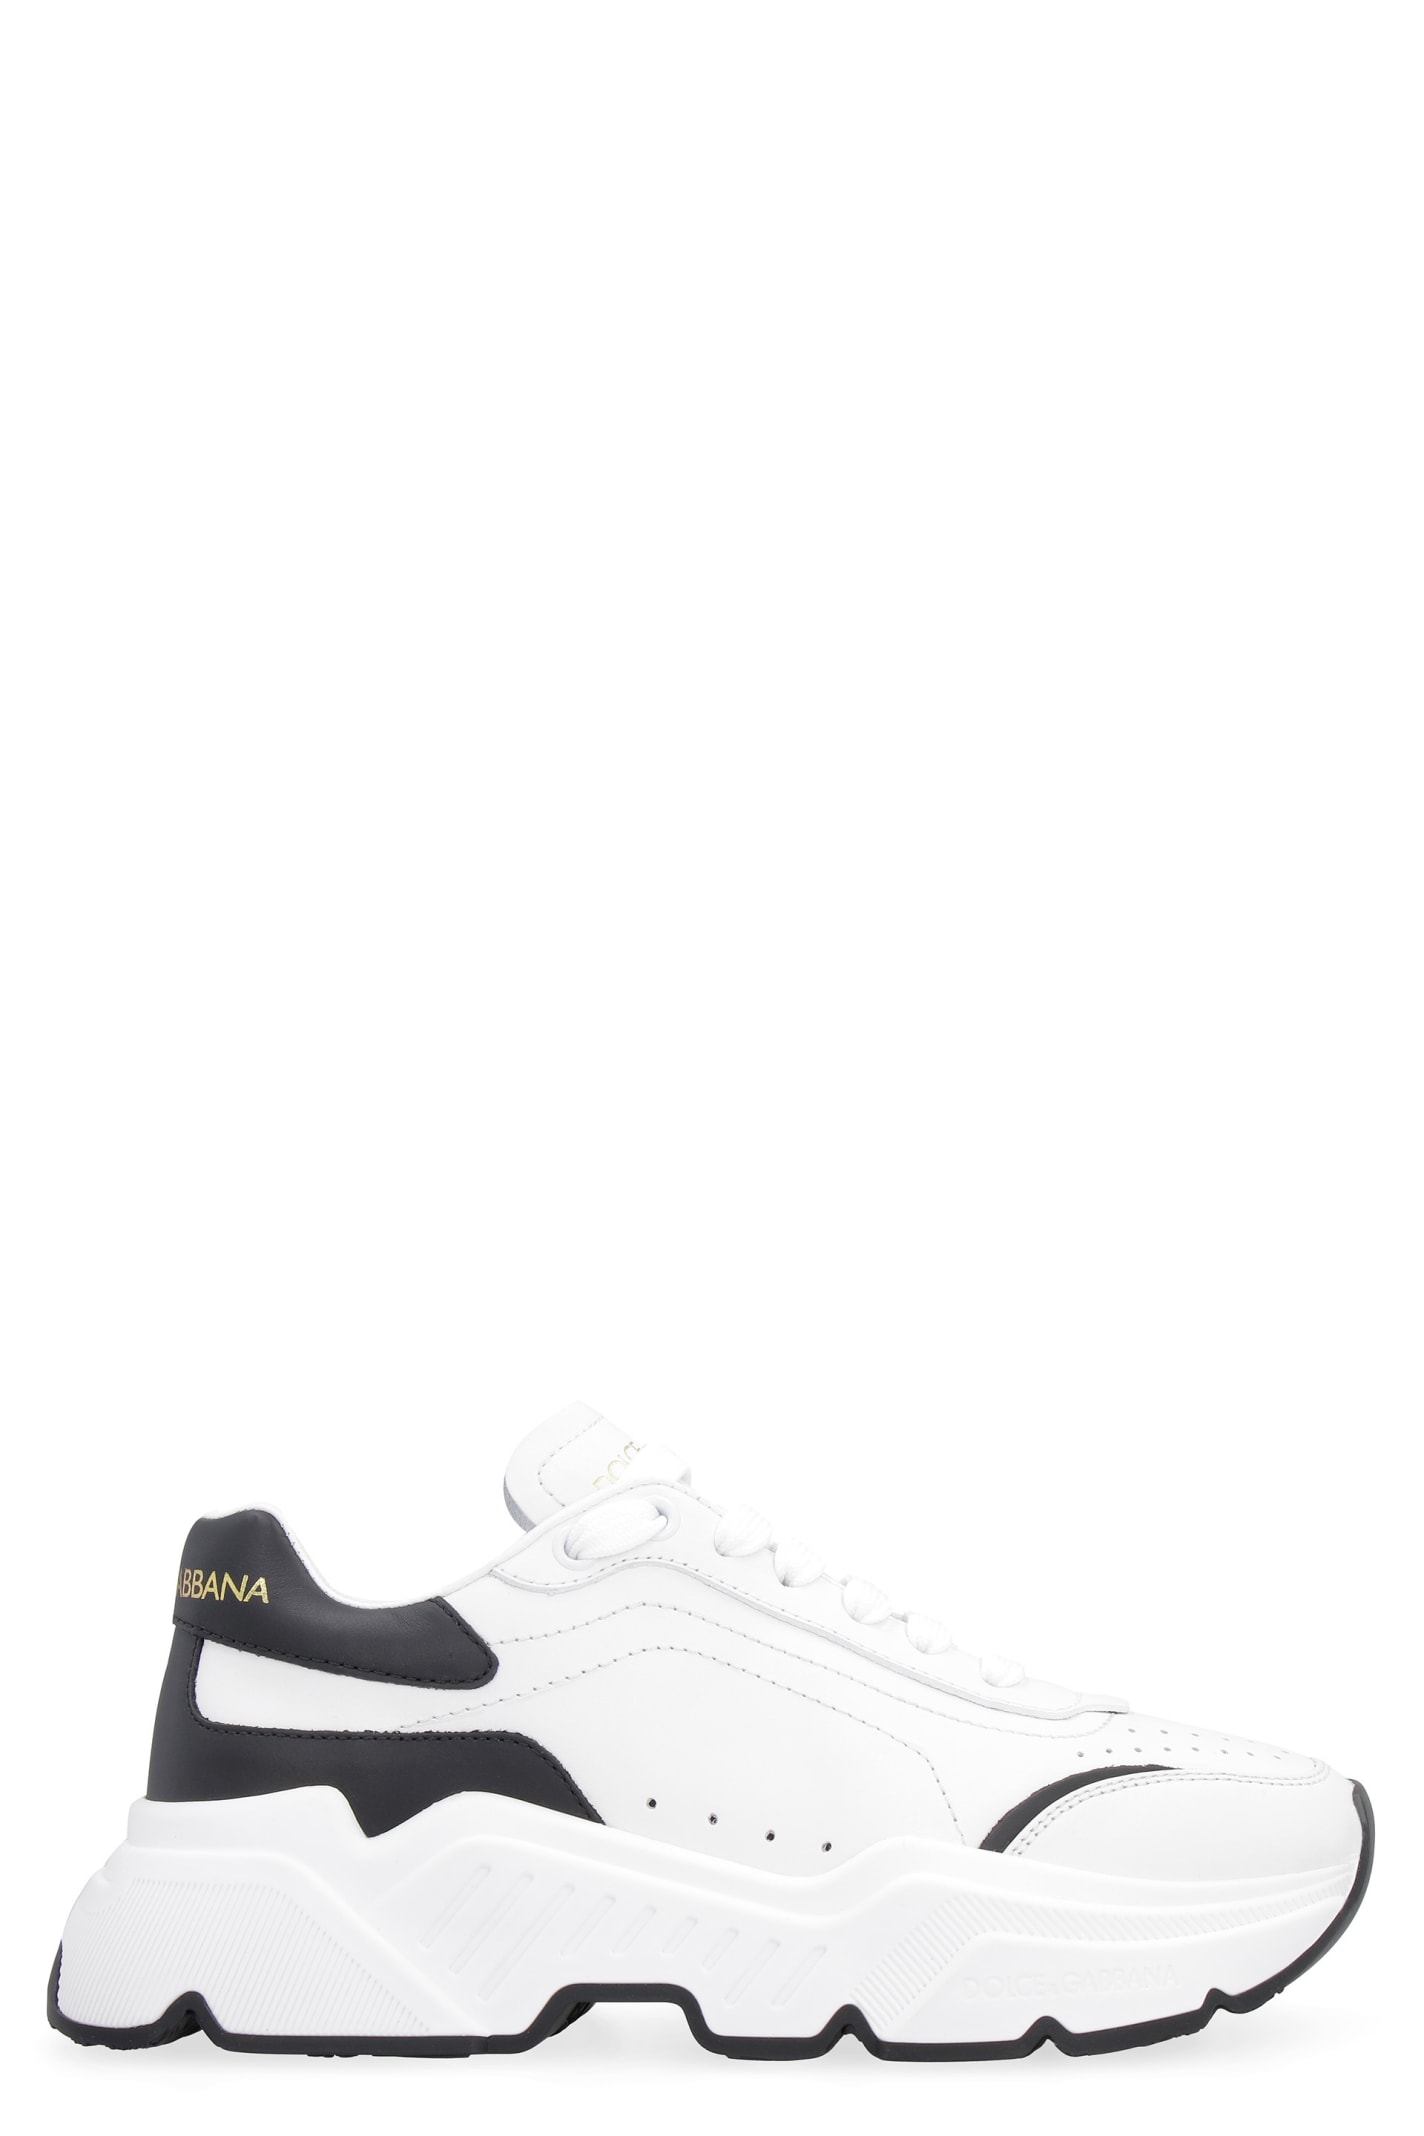 Dolce & Gabbana Daymaster Logo Detail Leather Sneakers